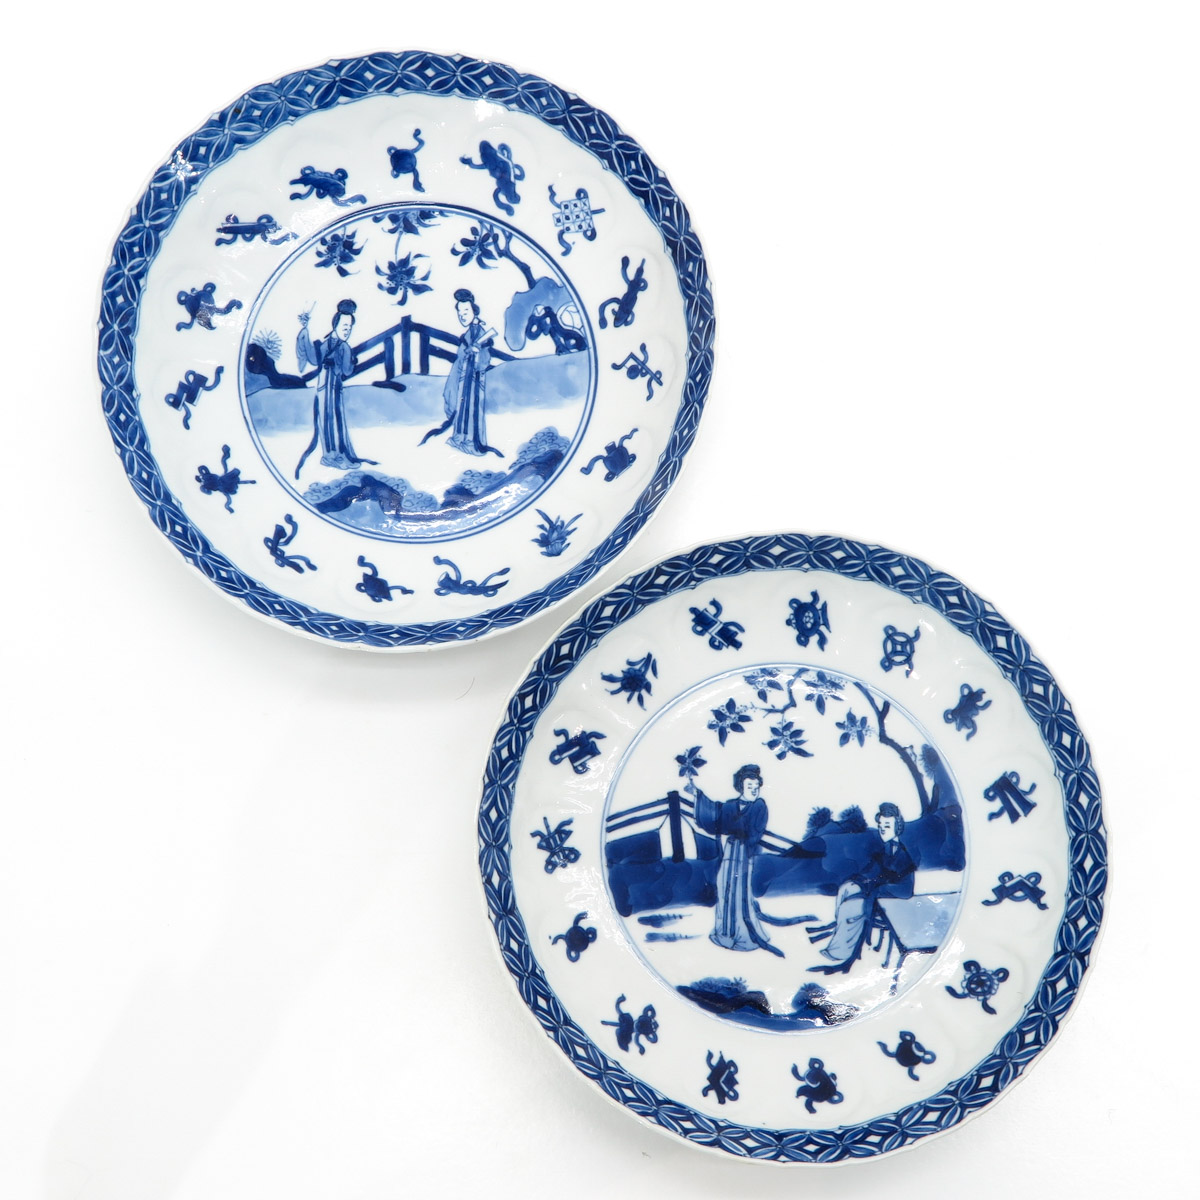 A Pair of Blue and White Decor Plates